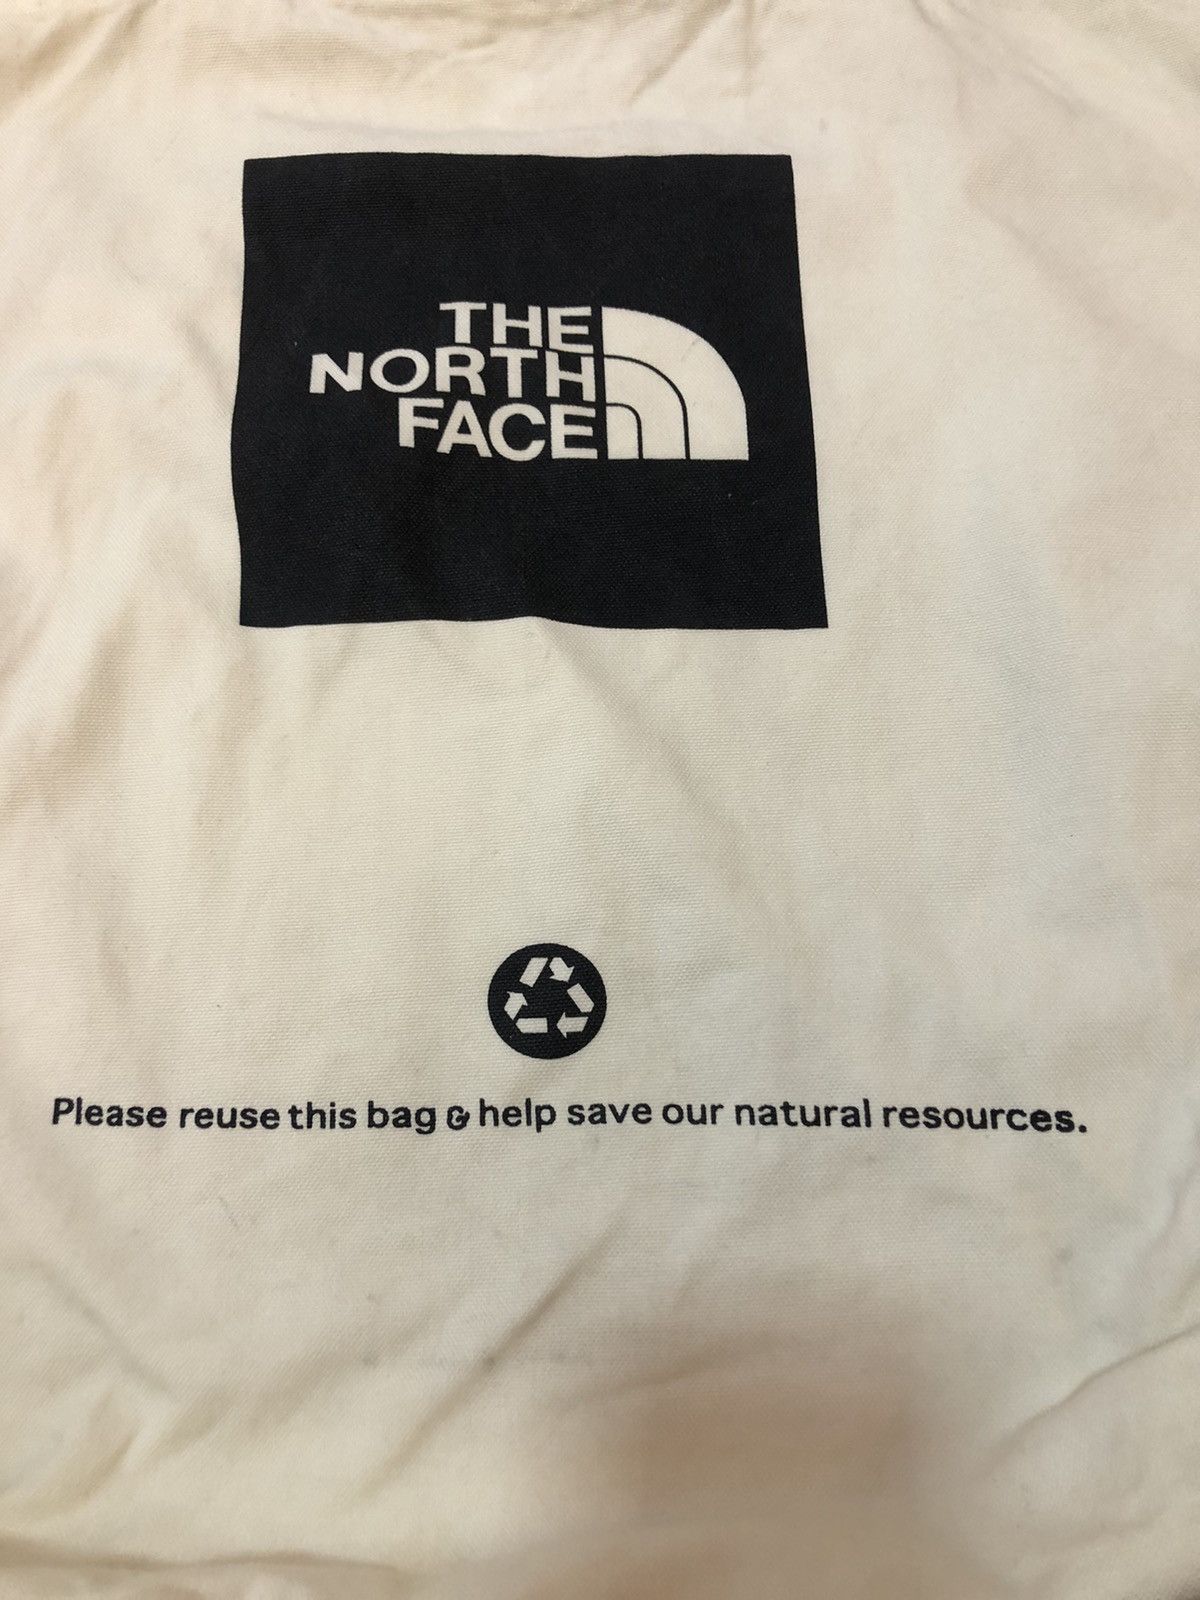 The North Face NN-1501 Tote Bag Made Vietnam - 6